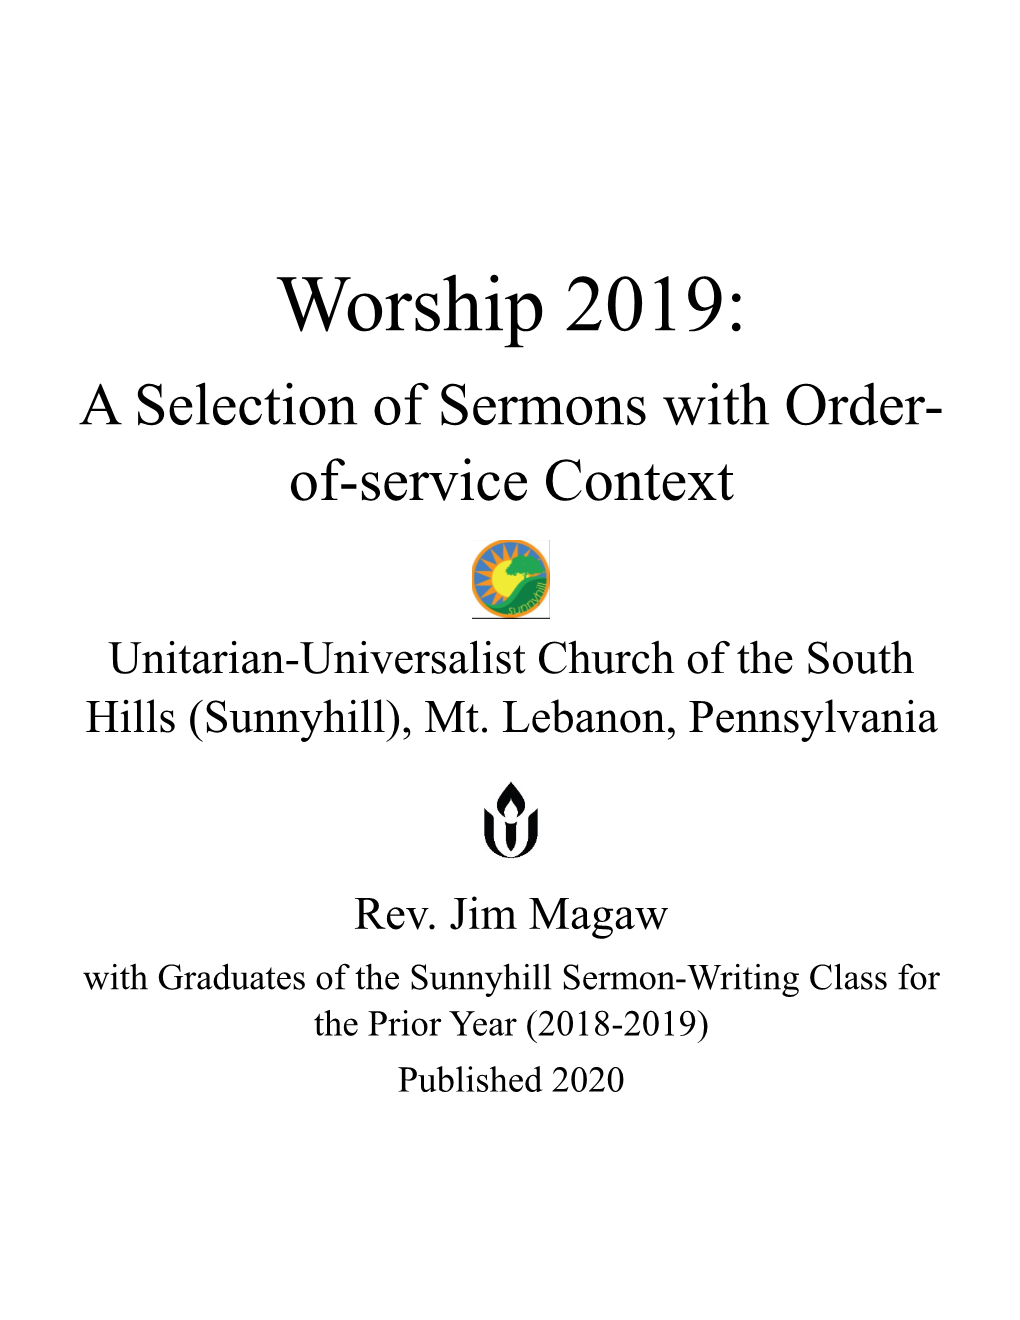 Worship 2019: a Selection of Sermons with Order- Of-Service Context